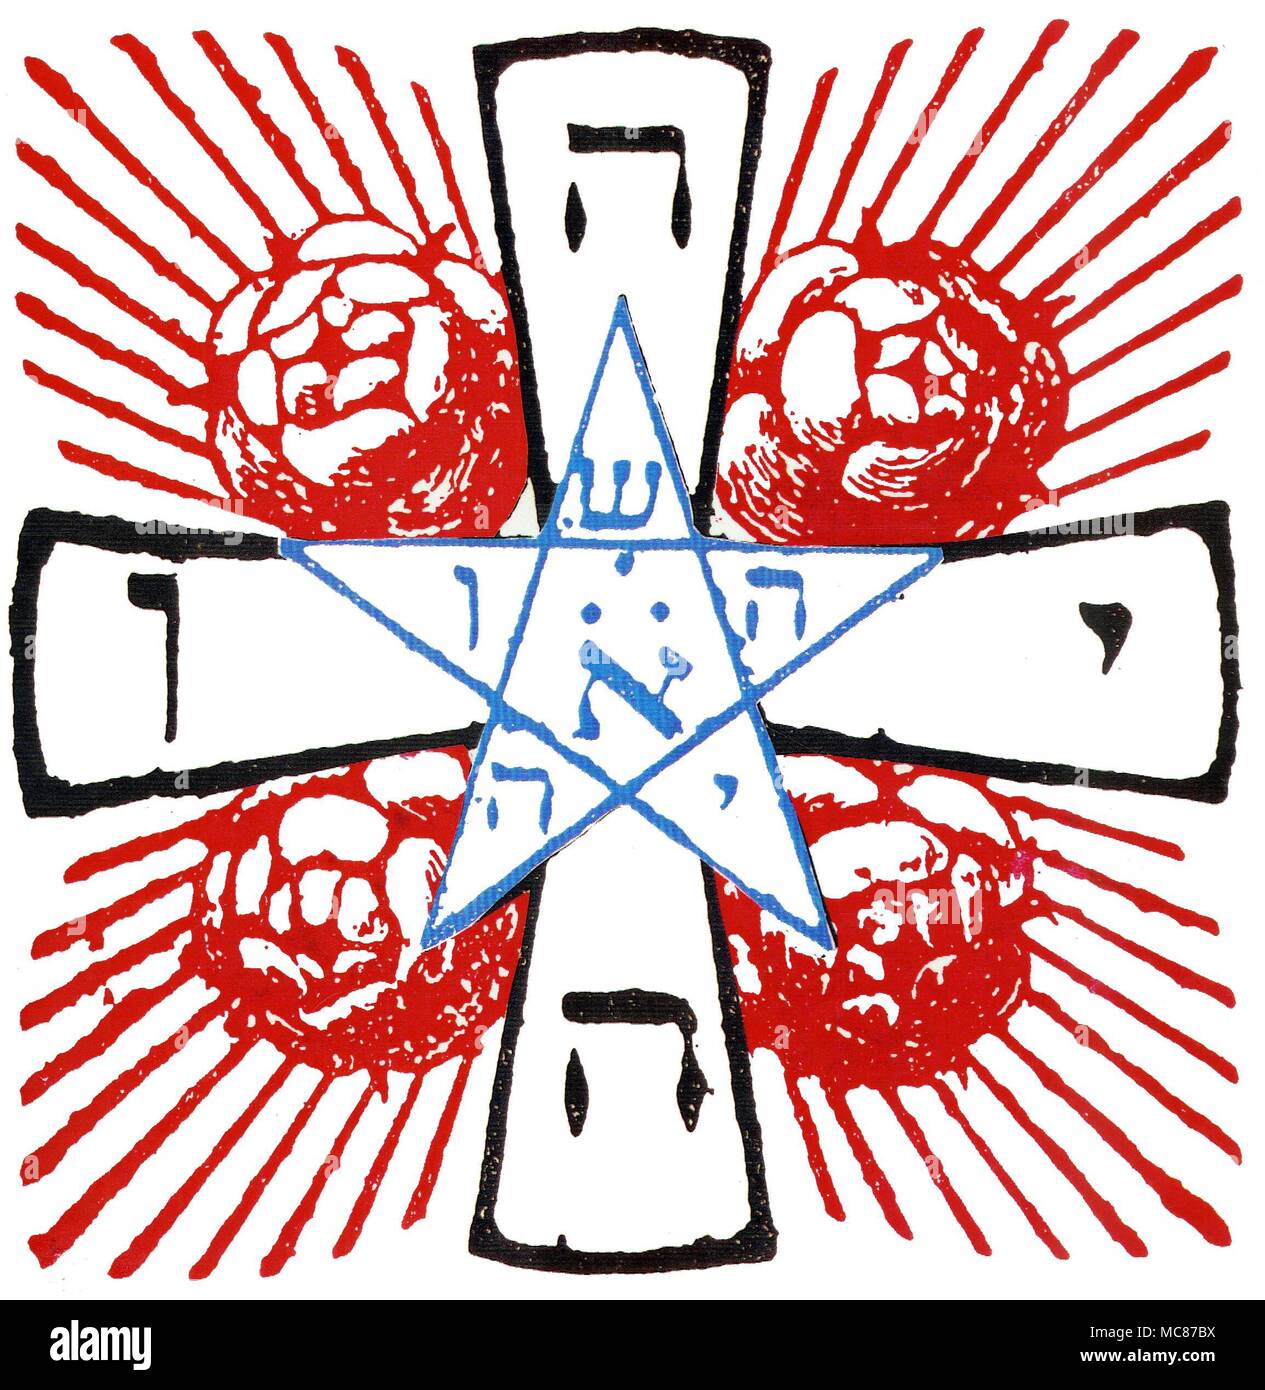 SYMBOLS - ROSICRUCIAN CROSS The Rosicrucian cross designed by Stanislas de  Guaita in 1888, and reproduced by Oswald Wirth in Le Tarot des Imagiers du  Moyen Age, 1927. The four letters of